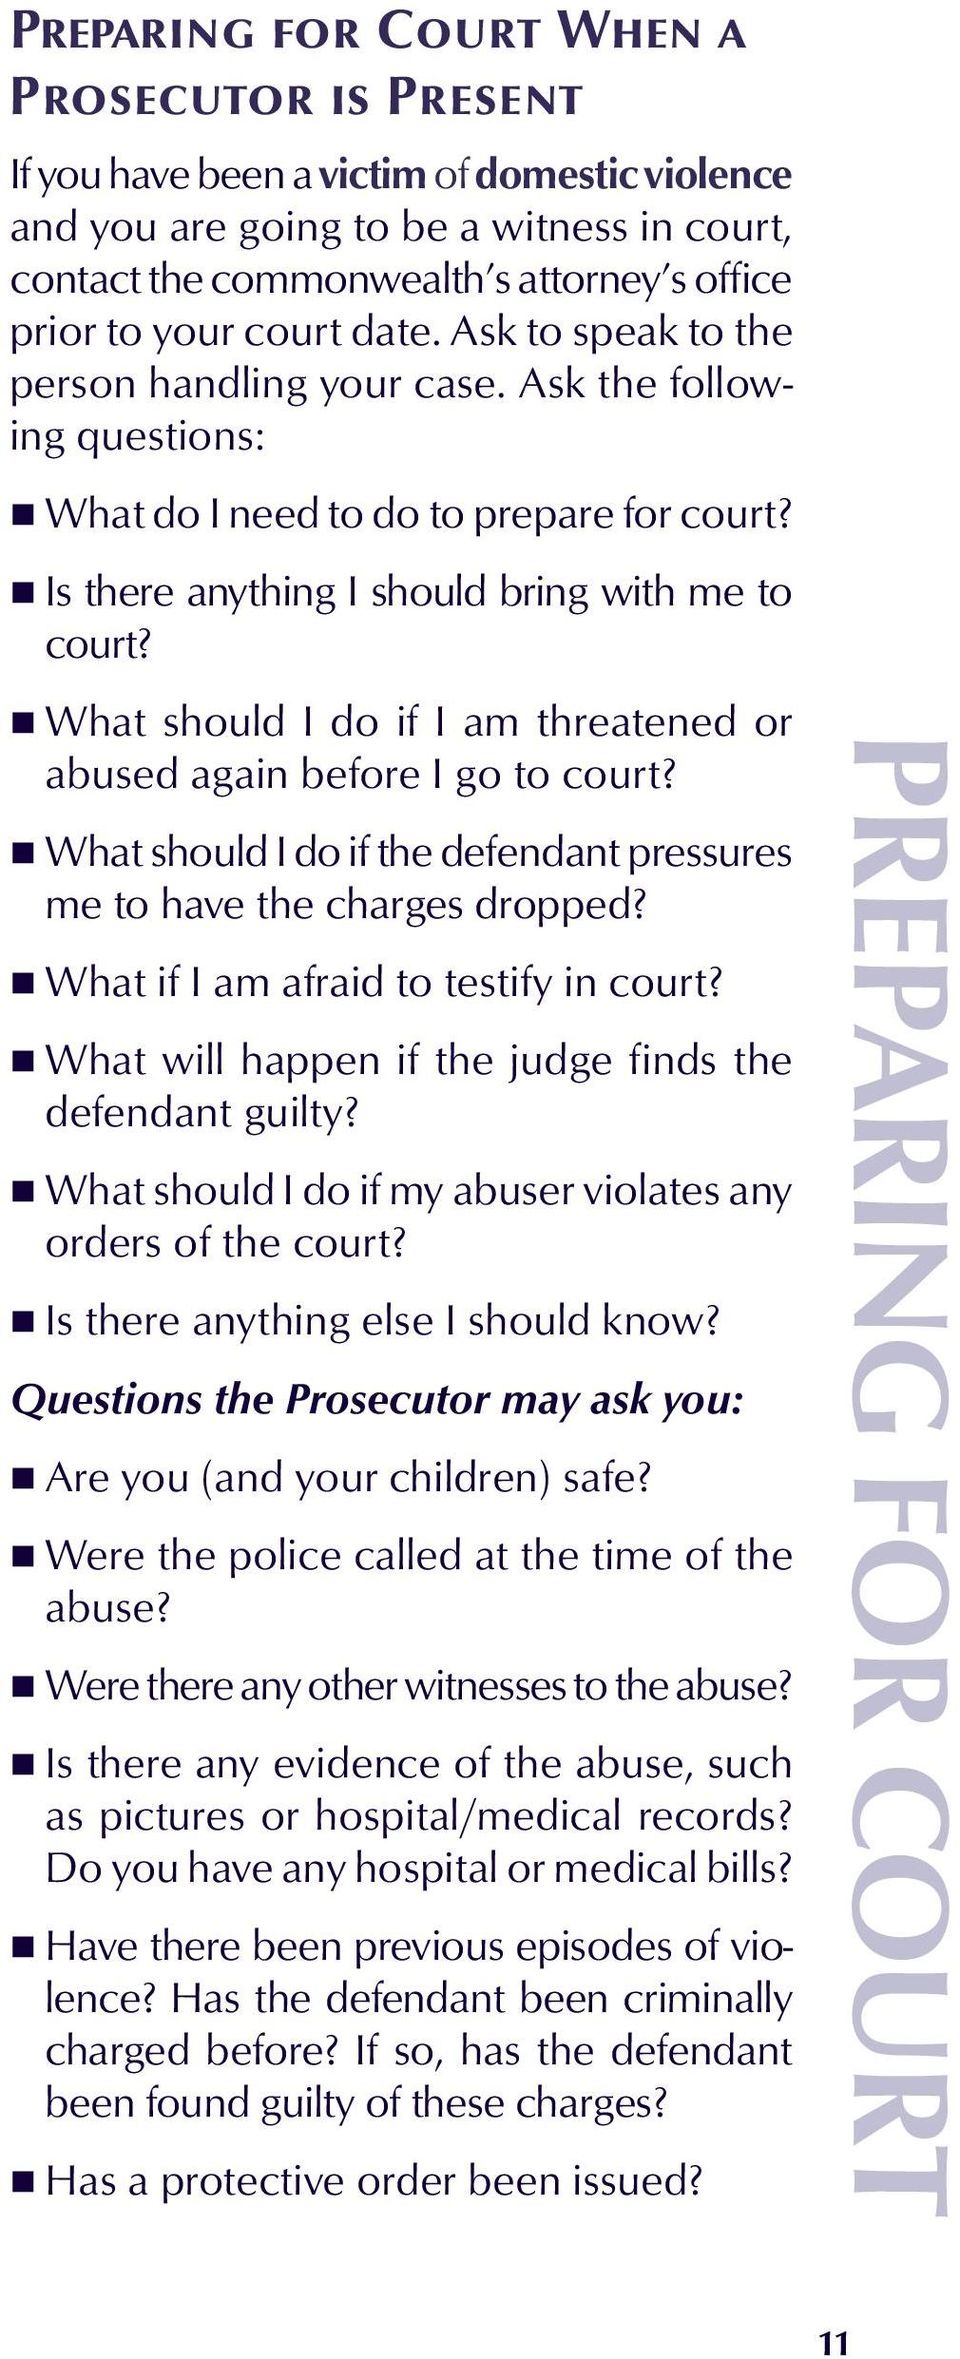 What should I do if I am threatened or abused again before I go to court? What should I do if the defendant pressures me to have the charges dropped? What if I am afraid to testify in court?